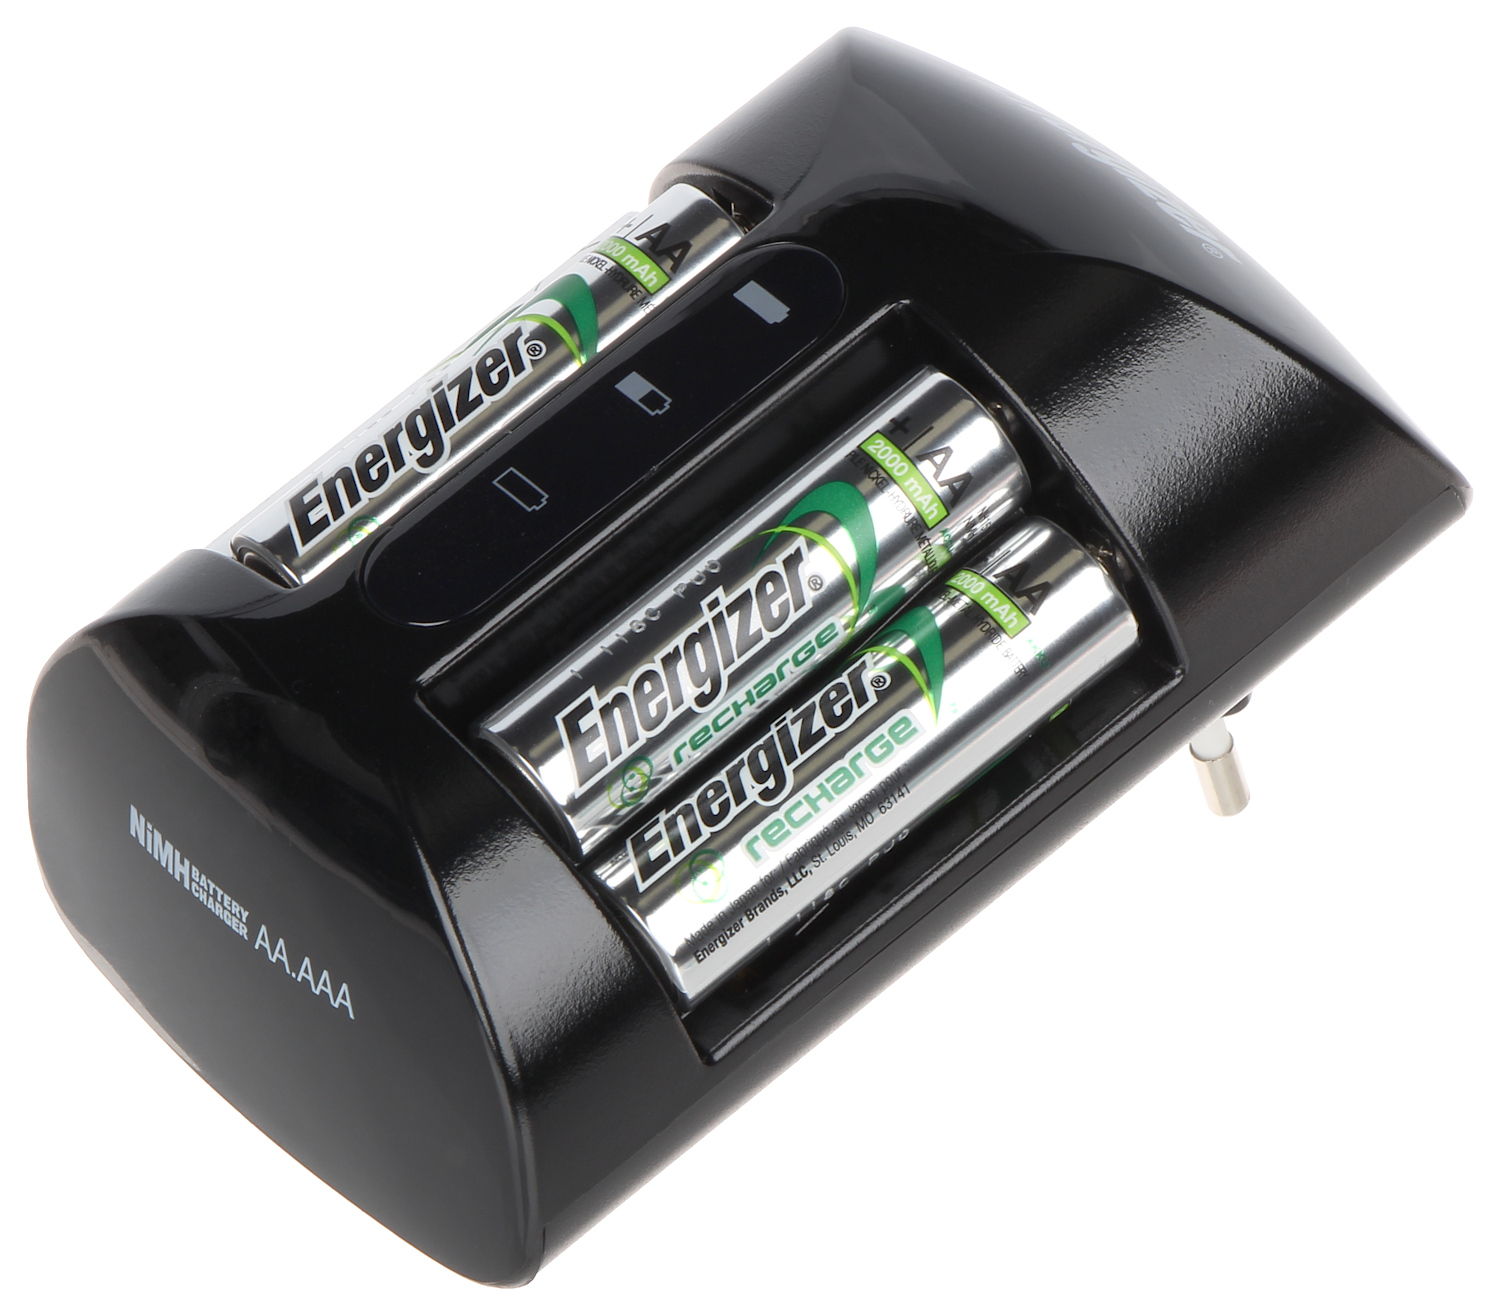 CHARGER BAT-RECHARGE/PRO ENERGIZER - Battery Chargers - Delta